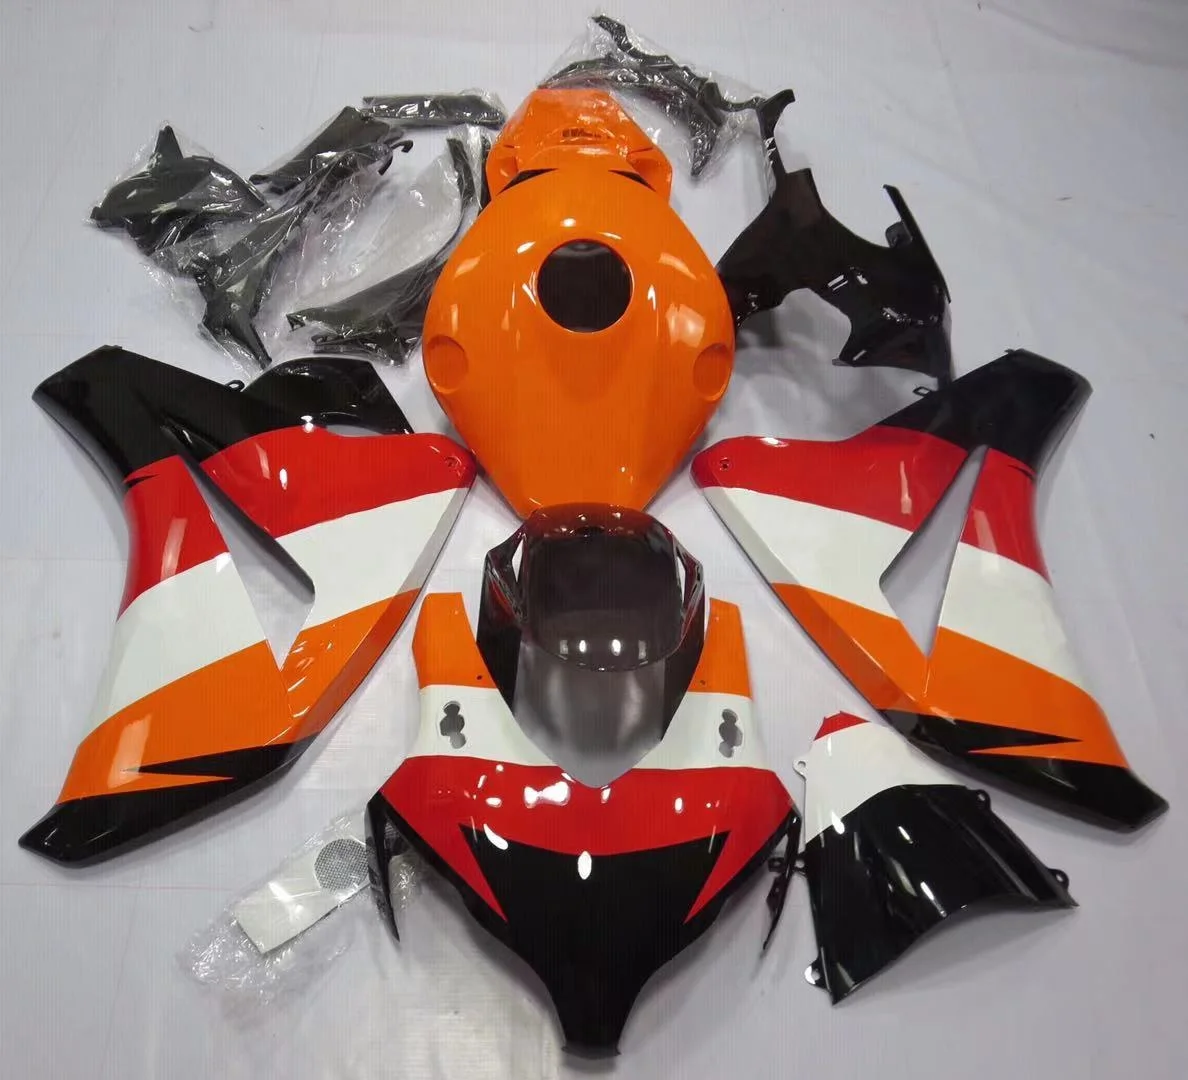 

2021 WHSC Motorcycle ABS Plastic Fairing Kit For HONDA CBR1000 2008-2011, Pictures shown